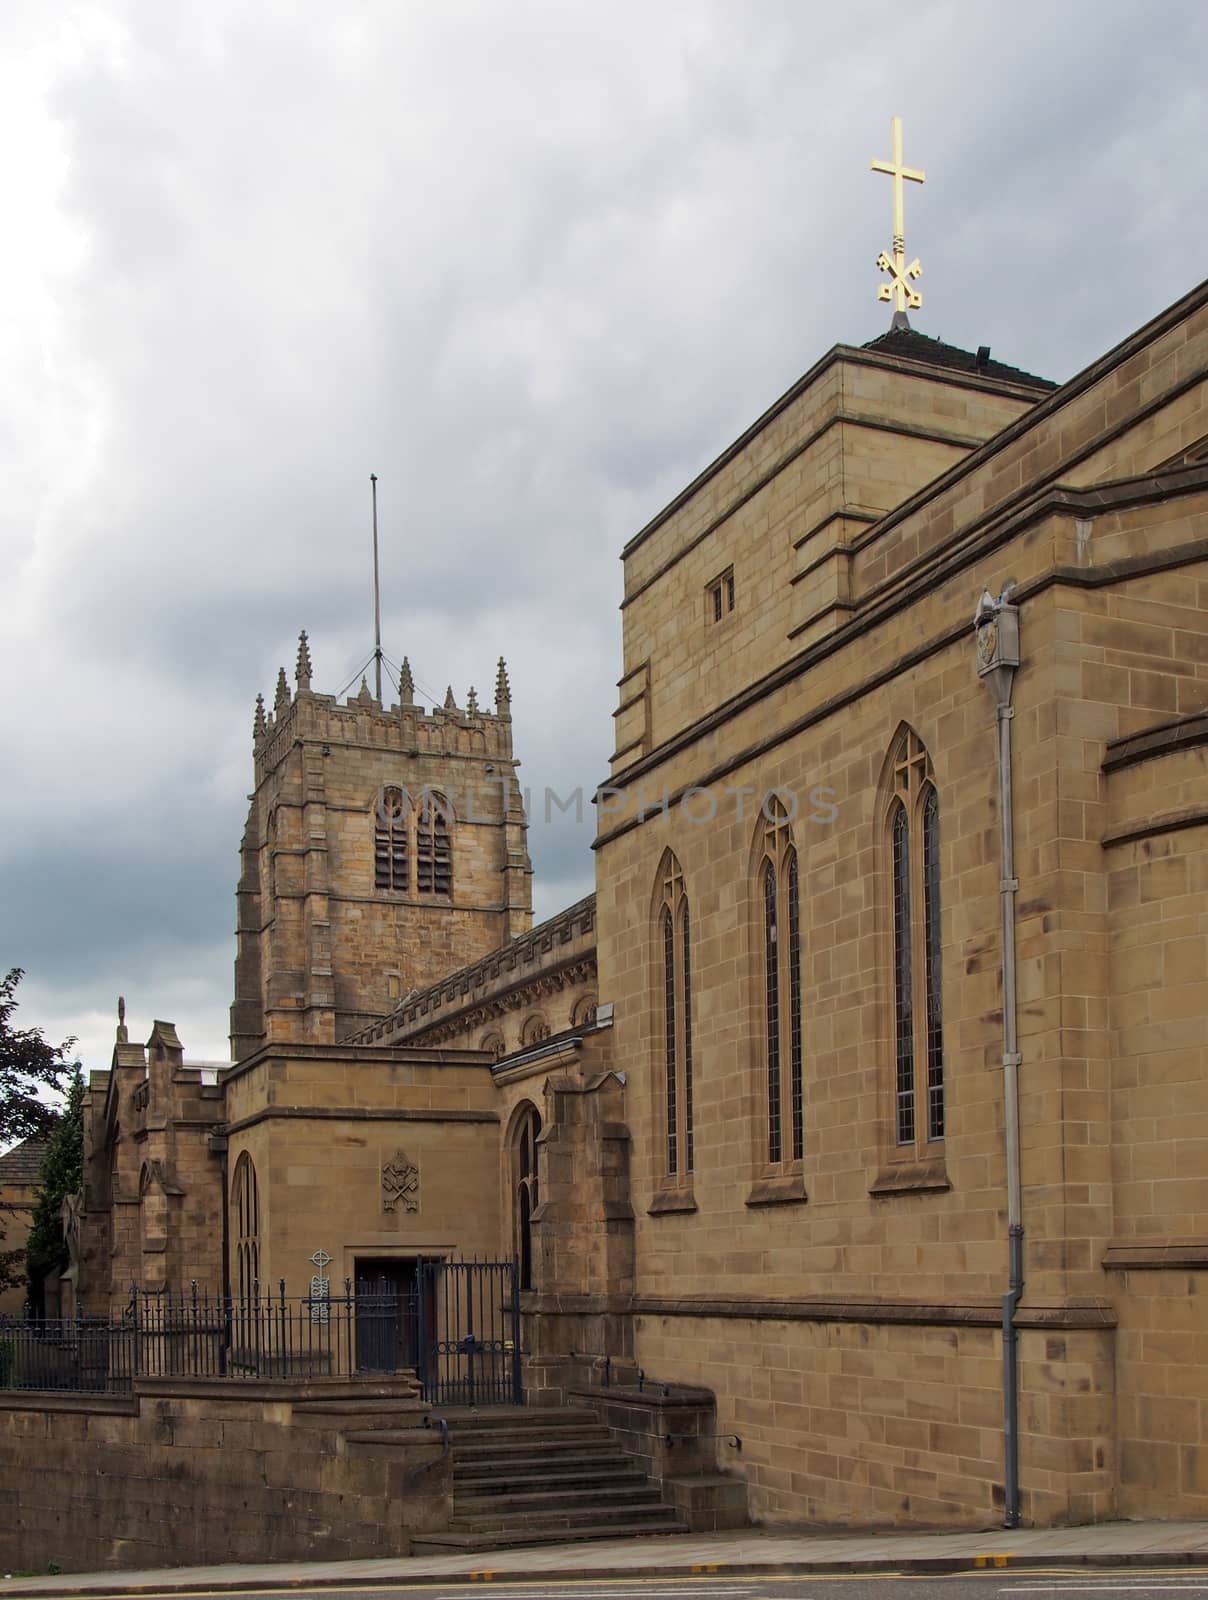 a view of the medieval church of bradford cathedral in west yorkshire with main building and entrance from the street